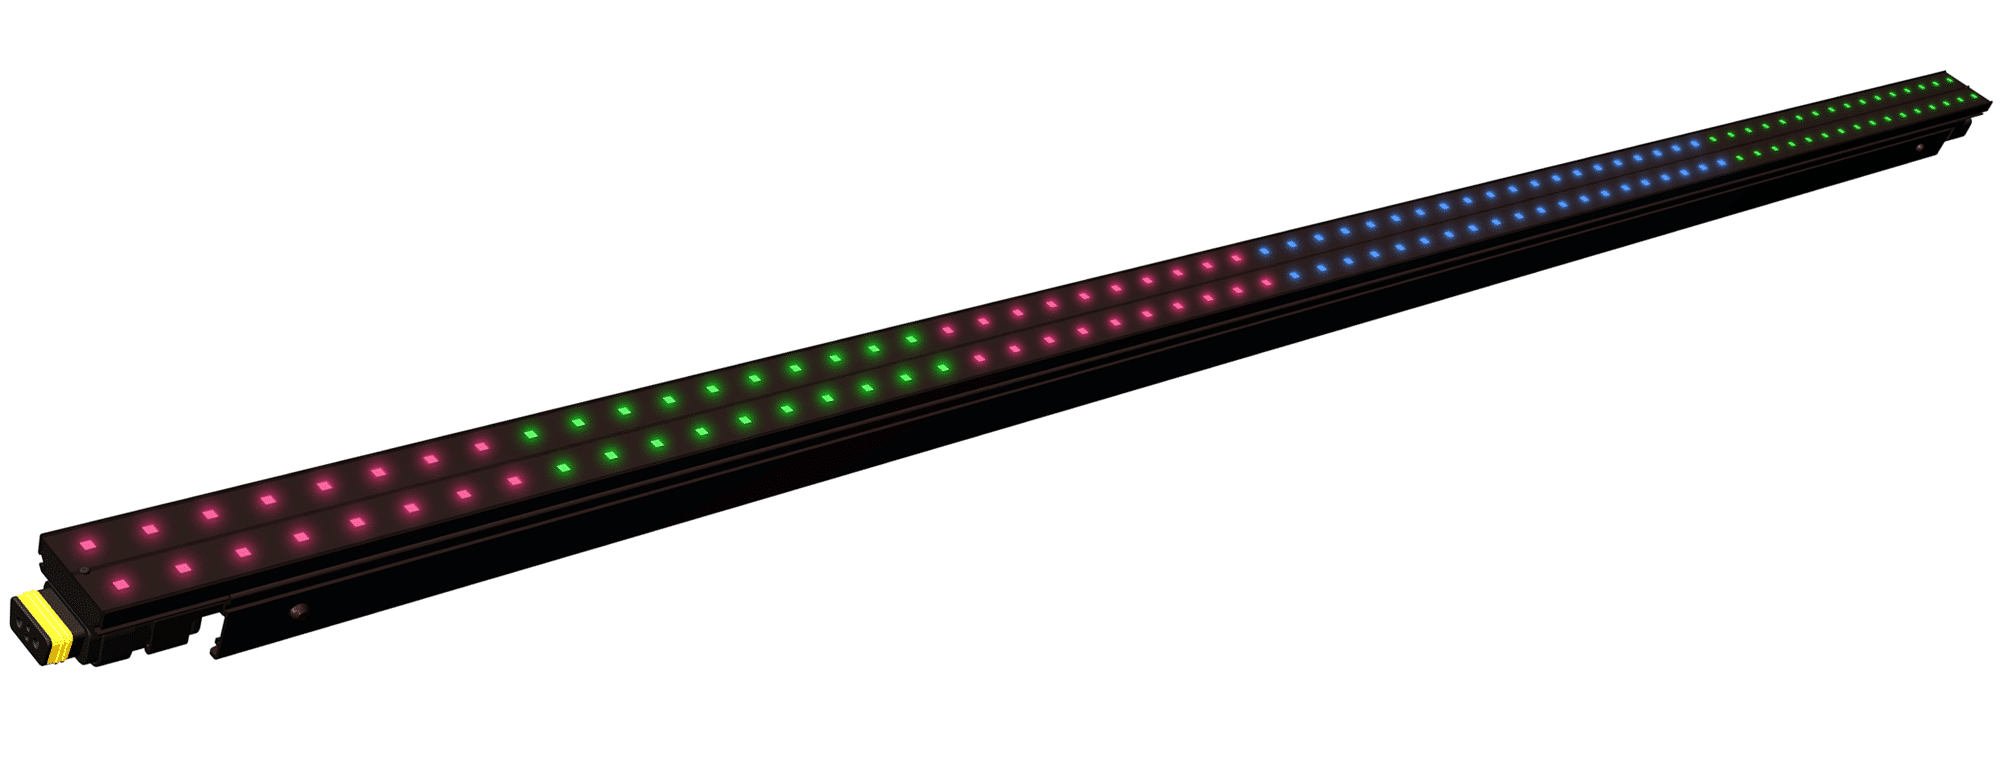 led strip video EVERY LED AS ONE PIXEL